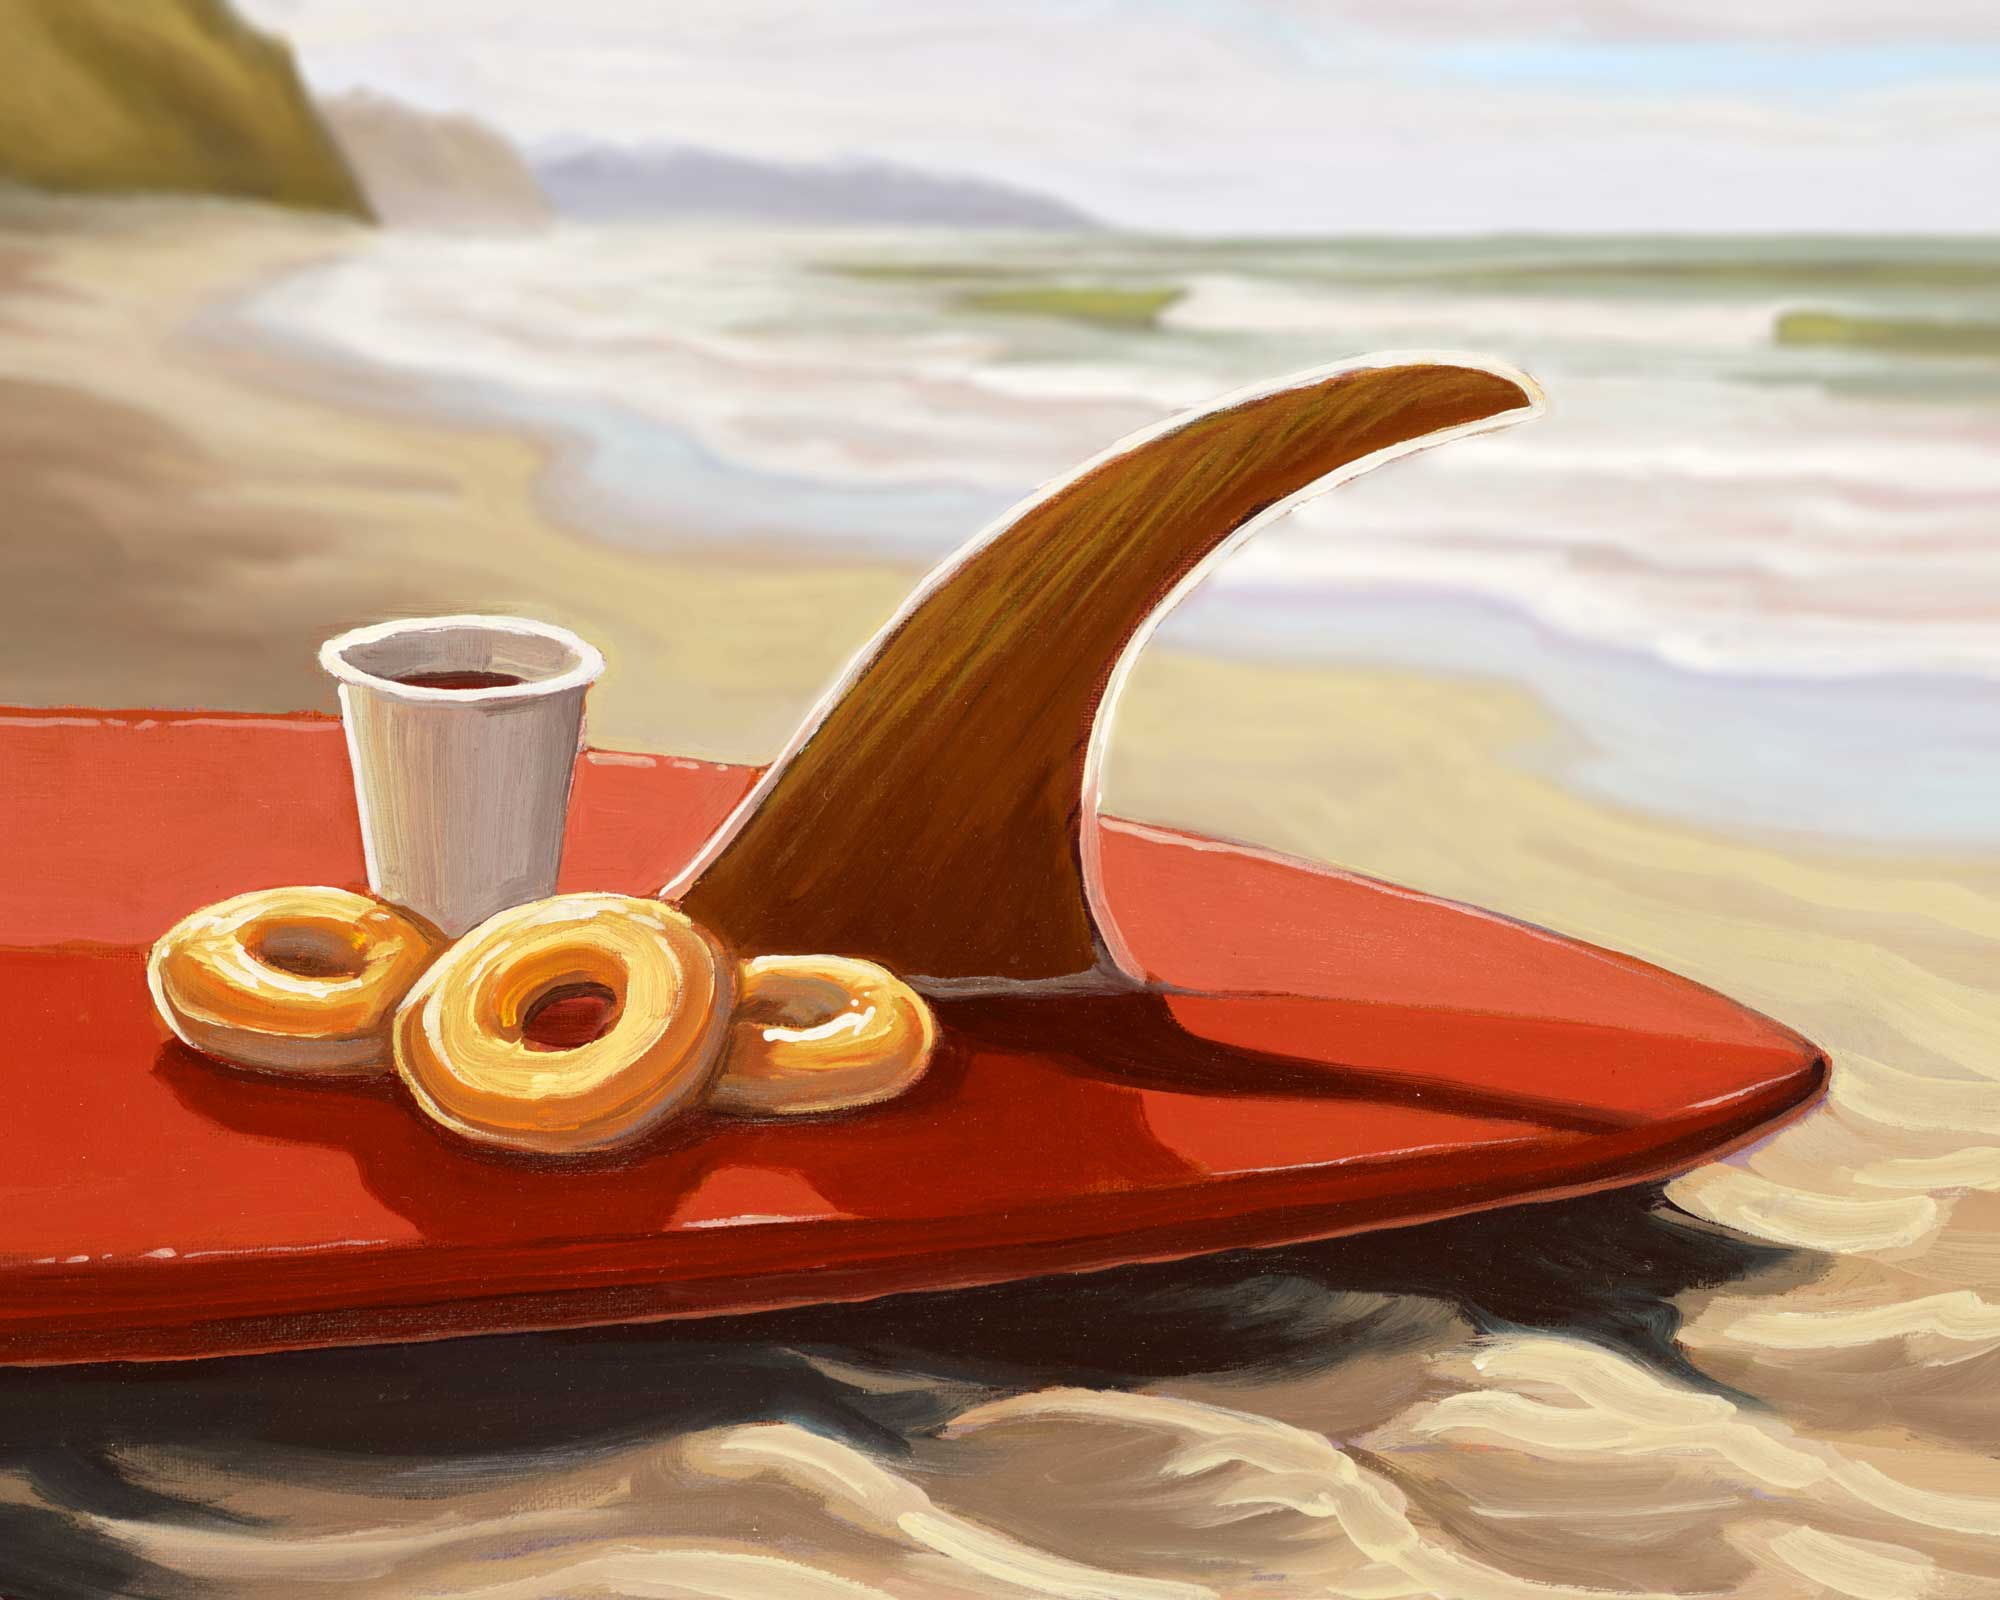 Plein air still life artwork of a surfboard donuts and coffee on the beach on the San Diego coast of southern california